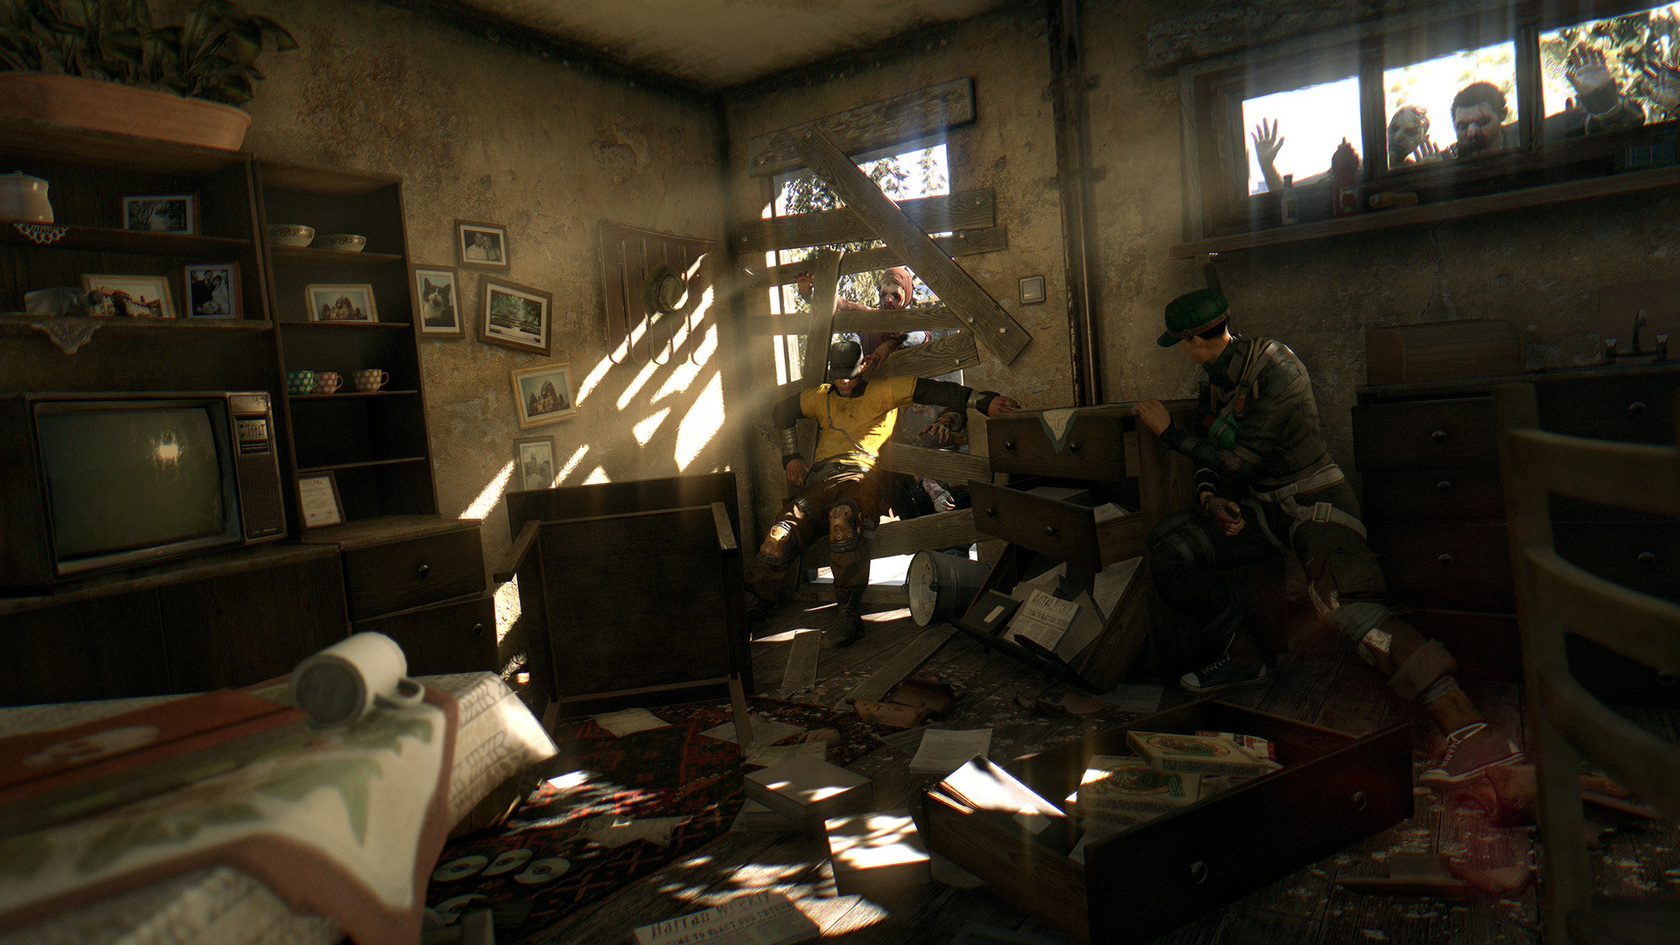 Dying Light Enhanced Edition  Steam Game Key for PC, Mac, Linux